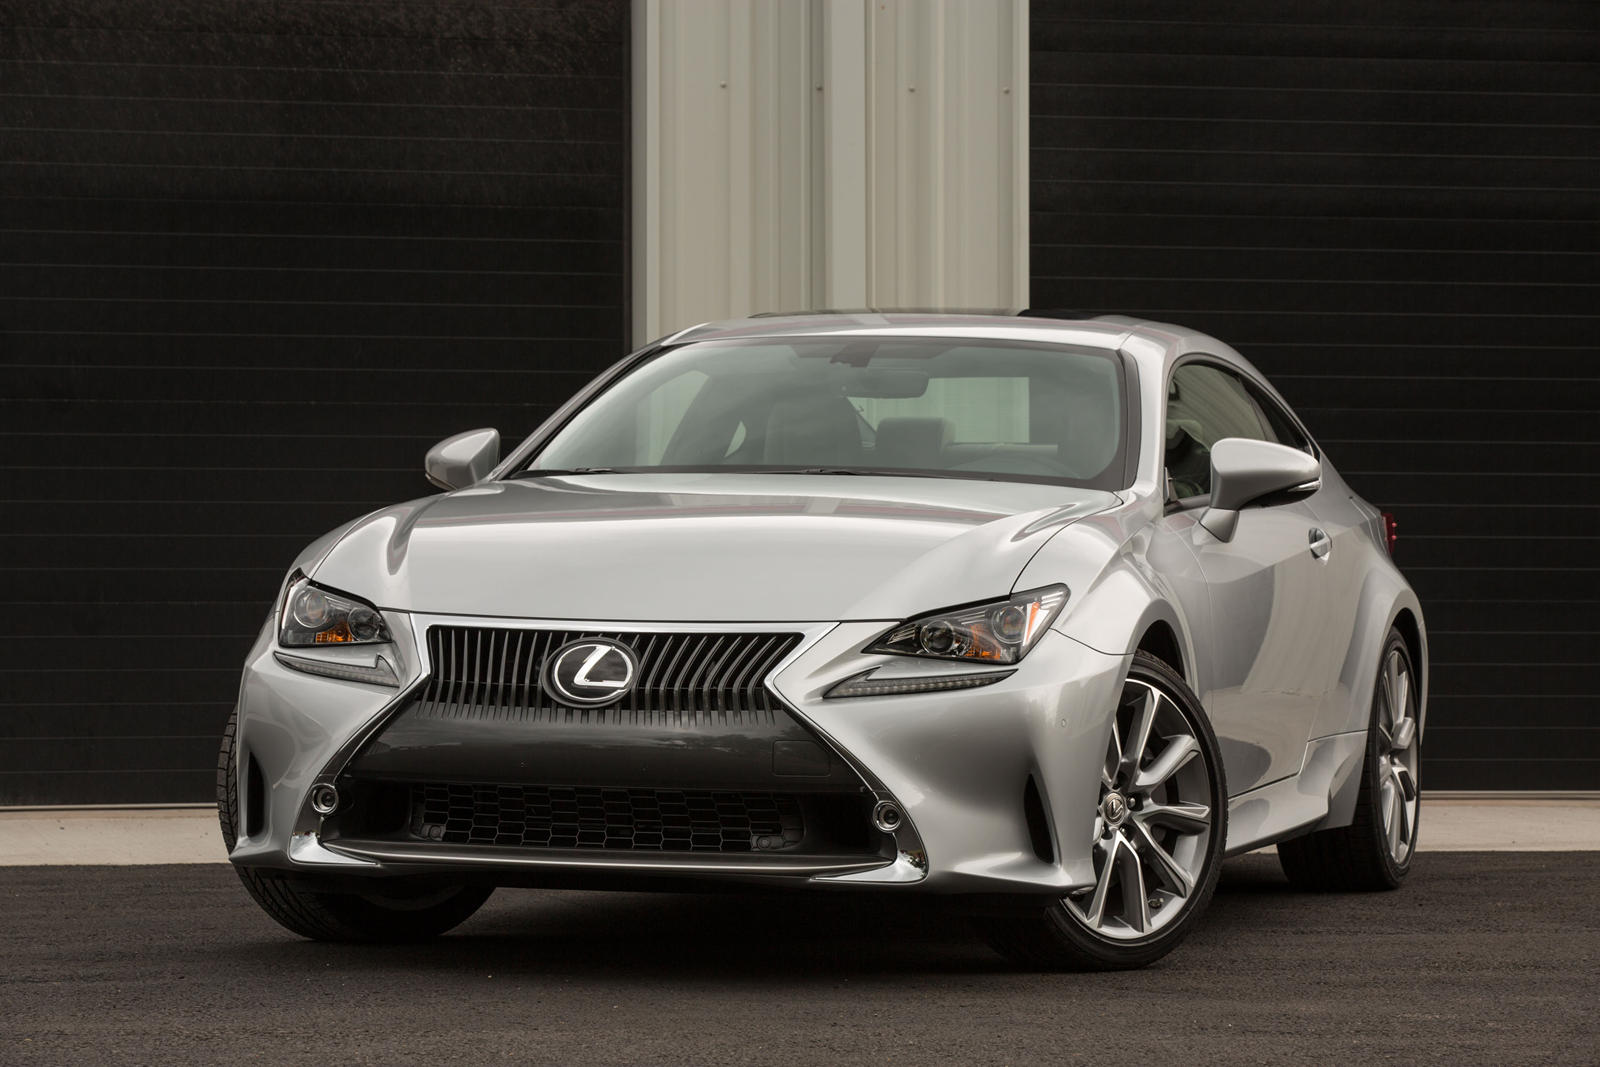 2016 Lexus RC Front Angle View